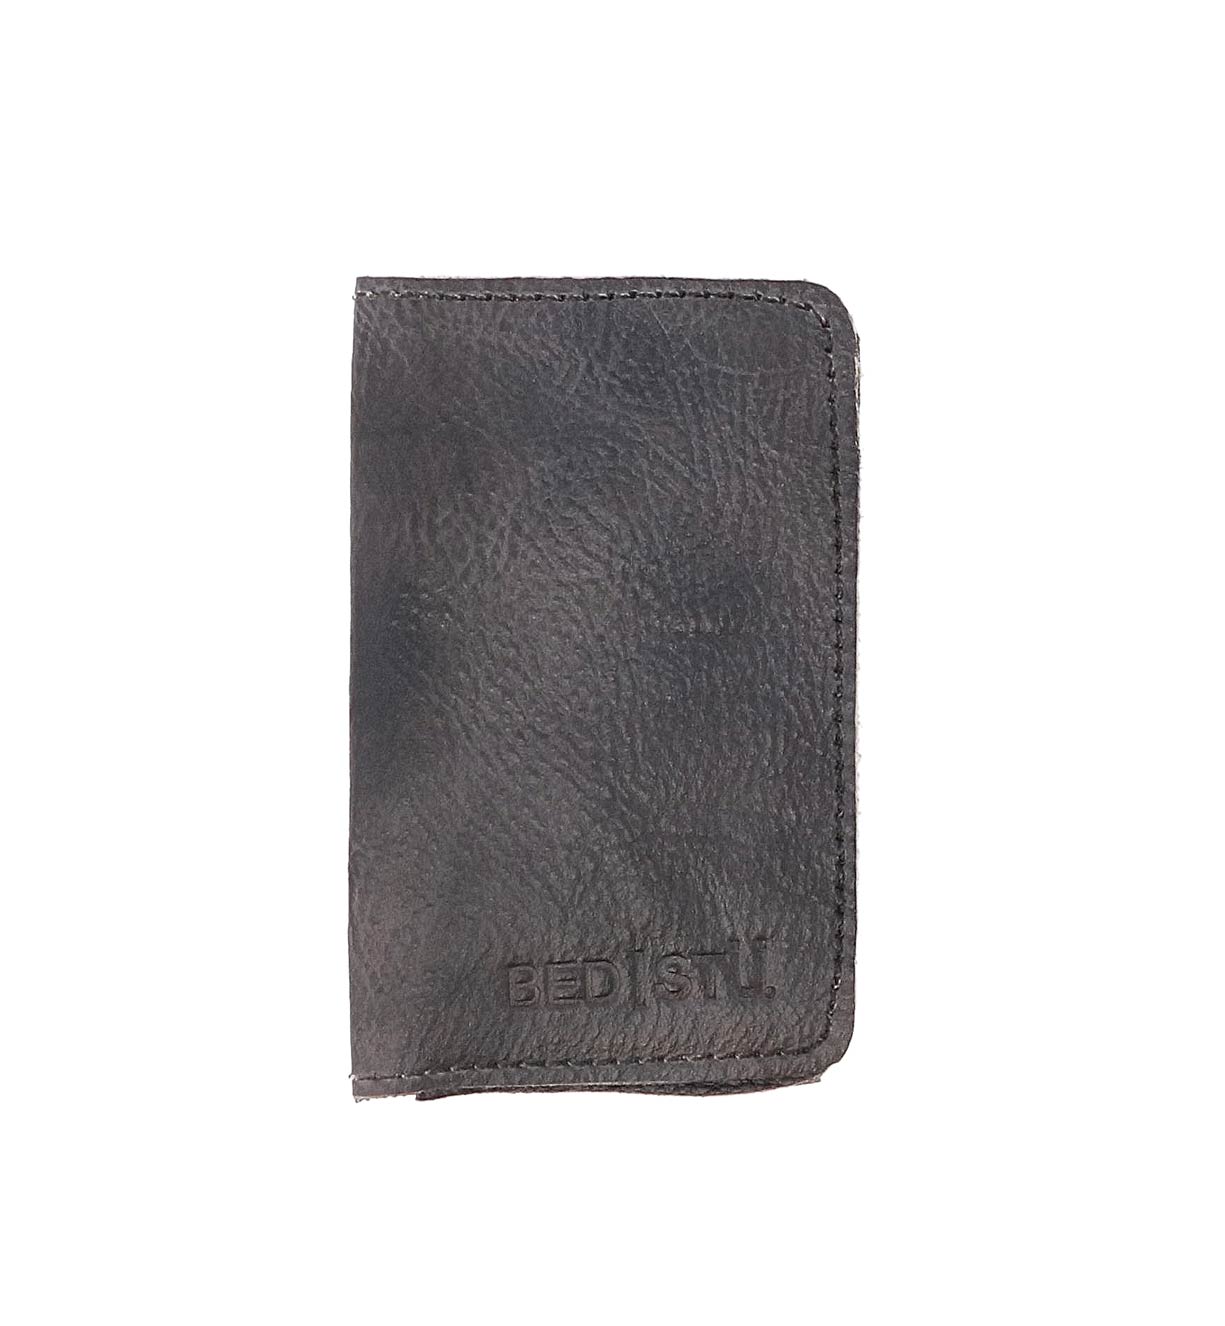 A black leather Heston wallet with the word unster on it, made by Bed Stu.